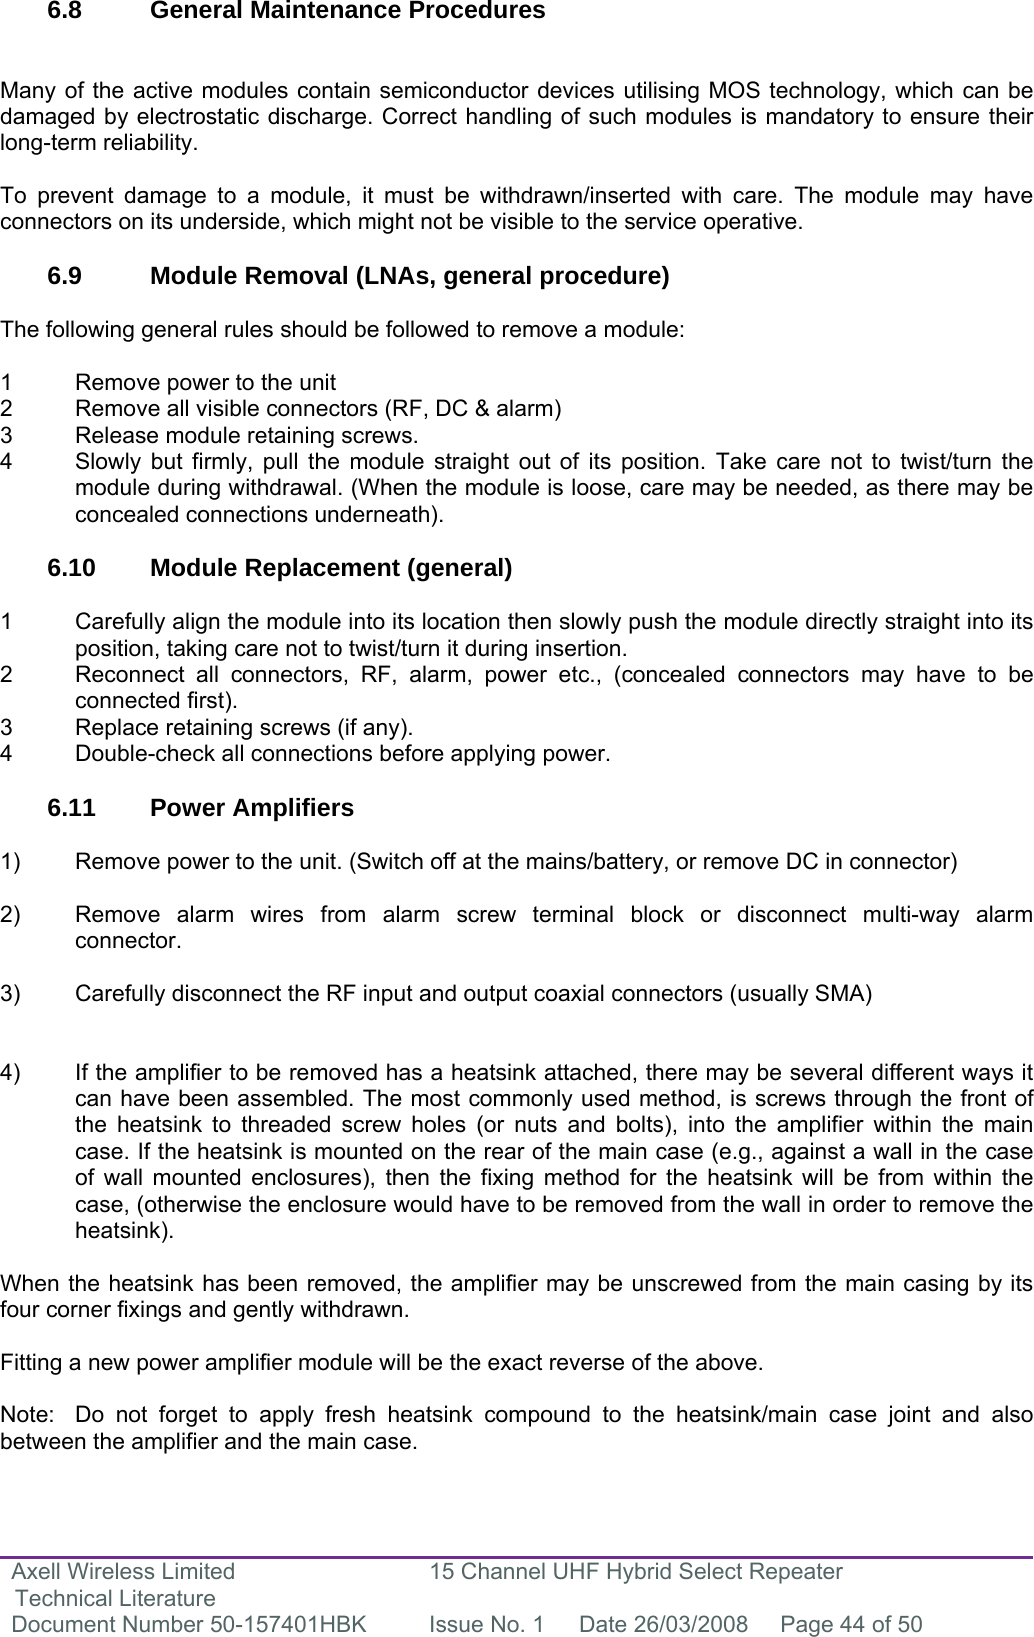 Axell Wireless Limited Technical Literature 15 Channel UHF Hybrid Select Repeater Document Number 50-157401HBK  Issue No. 1  Date 26/03/2008  Page 44 of 50   6.8  General Maintenance Procedures   Many of the active modules contain semiconductor devices utilising MOS technology, which can be damaged by electrostatic discharge. Correct handling of such modules is mandatory to ensure their long-term reliability.  To prevent damage to a module, it must be withdrawn/inserted with care. The module may have connectors on its underside, which might not be visible to the service operative.  6.9  Module Removal (LNAs, general procedure)  The following general rules should be followed to remove a module:  1  Remove power to the unit 2  Remove all visible connectors (RF, DC &amp; alarm) 3  Release module retaining screws. 4  Slowly but firmly, pull the module straight out of its position. Take care not to twist/turn the   module during withdrawal. (When the module is loose, care may be needed, as there may be   concealed connections underneath).  6.10  Module Replacement (general)  1  Carefully align the module into its location then slowly push the module directly straight into its   position, taking care not to twist/turn it during insertion. 2  Reconnect all connectors, RF, alarm, power etc., (concealed connectors may have to be  connected first). 3  Replace retaining screws (if any). 4  Double-check all connections before applying power.  6.11 Power Amplifiers  1)  Remove power to the unit. (Switch off at the mains/battery, or remove DC in connector)  2)  Remove alarm wires from alarm screw terminal block or disconnect multi-way alarm connector.  3)  Carefully disconnect the RF input and output coaxial connectors (usually SMA)   4)  If the amplifier to be removed has a heatsink attached, there may be several different ways it can have been assembled. The most commonly used method, is screws through the front of the heatsink to threaded screw holes (or nuts and bolts), into the amplifier within the main case. If the heatsink is mounted on the rear of the main case (e.g., against a wall in the case of wall mounted enclosures), then the fixing method for the heatsink will be from within the case, (otherwise the enclosure would have to be removed from the wall in order to remove the heatsink).  When the heatsink has been removed, the amplifier may be unscrewed from the main casing by its four corner fixings and gently withdrawn.  Fitting a new power amplifier module will be the exact reverse of the above.  Note:  Do not forget to apply fresh heatsink compound to the heatsink/main case joint and also between the amplifier and the main case. 